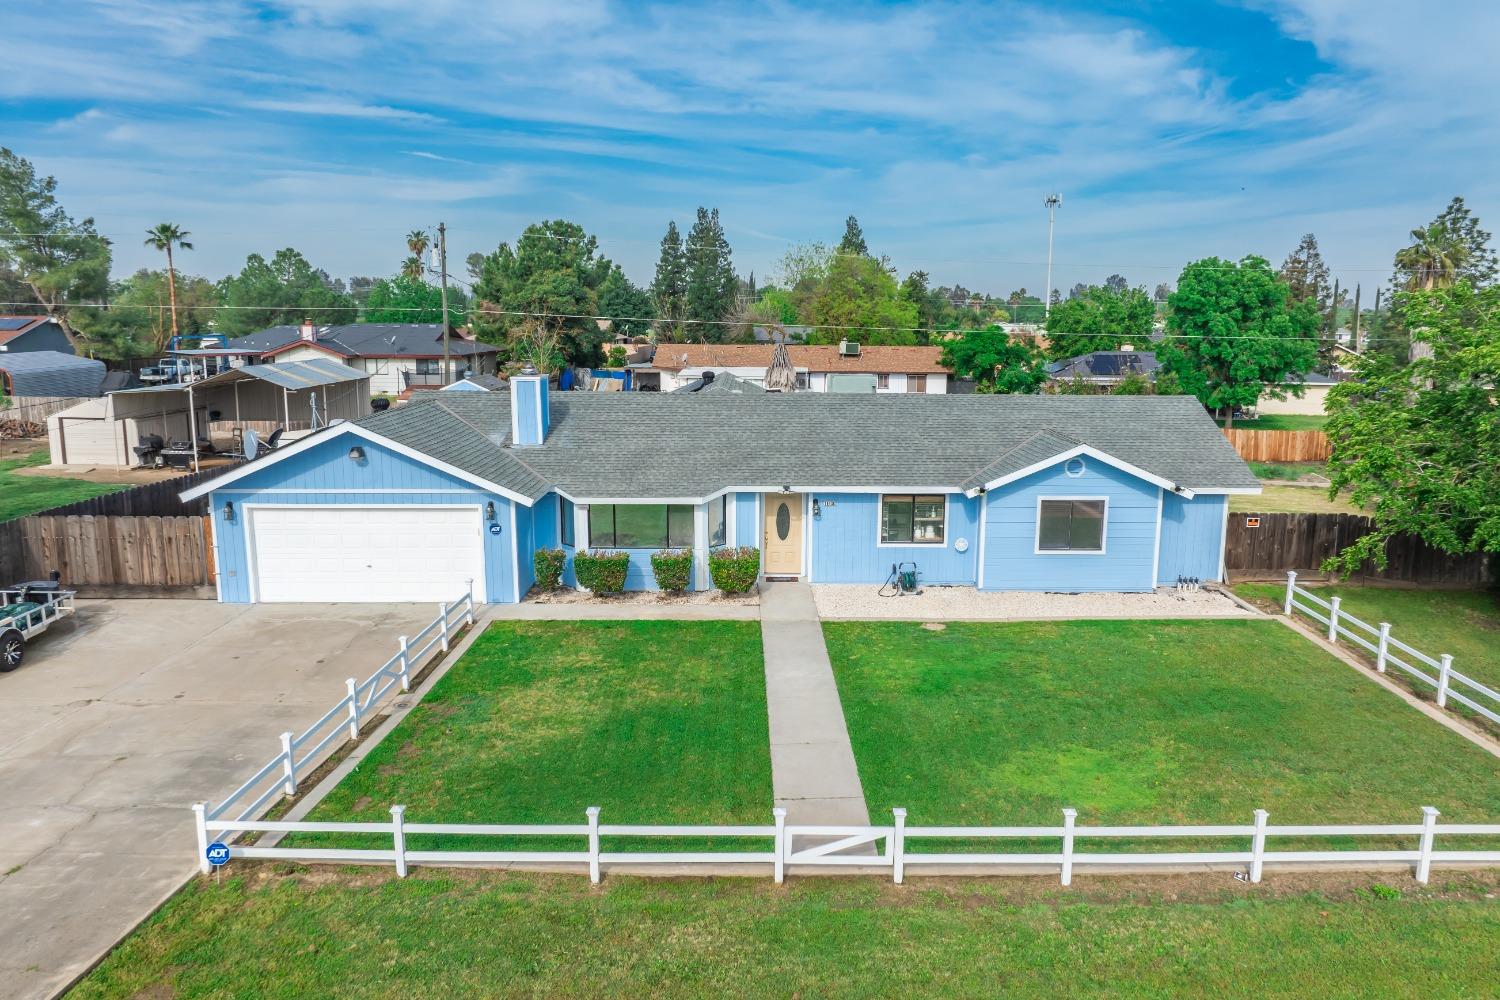 Photo of 18438 Regal Dr in Madera, CA